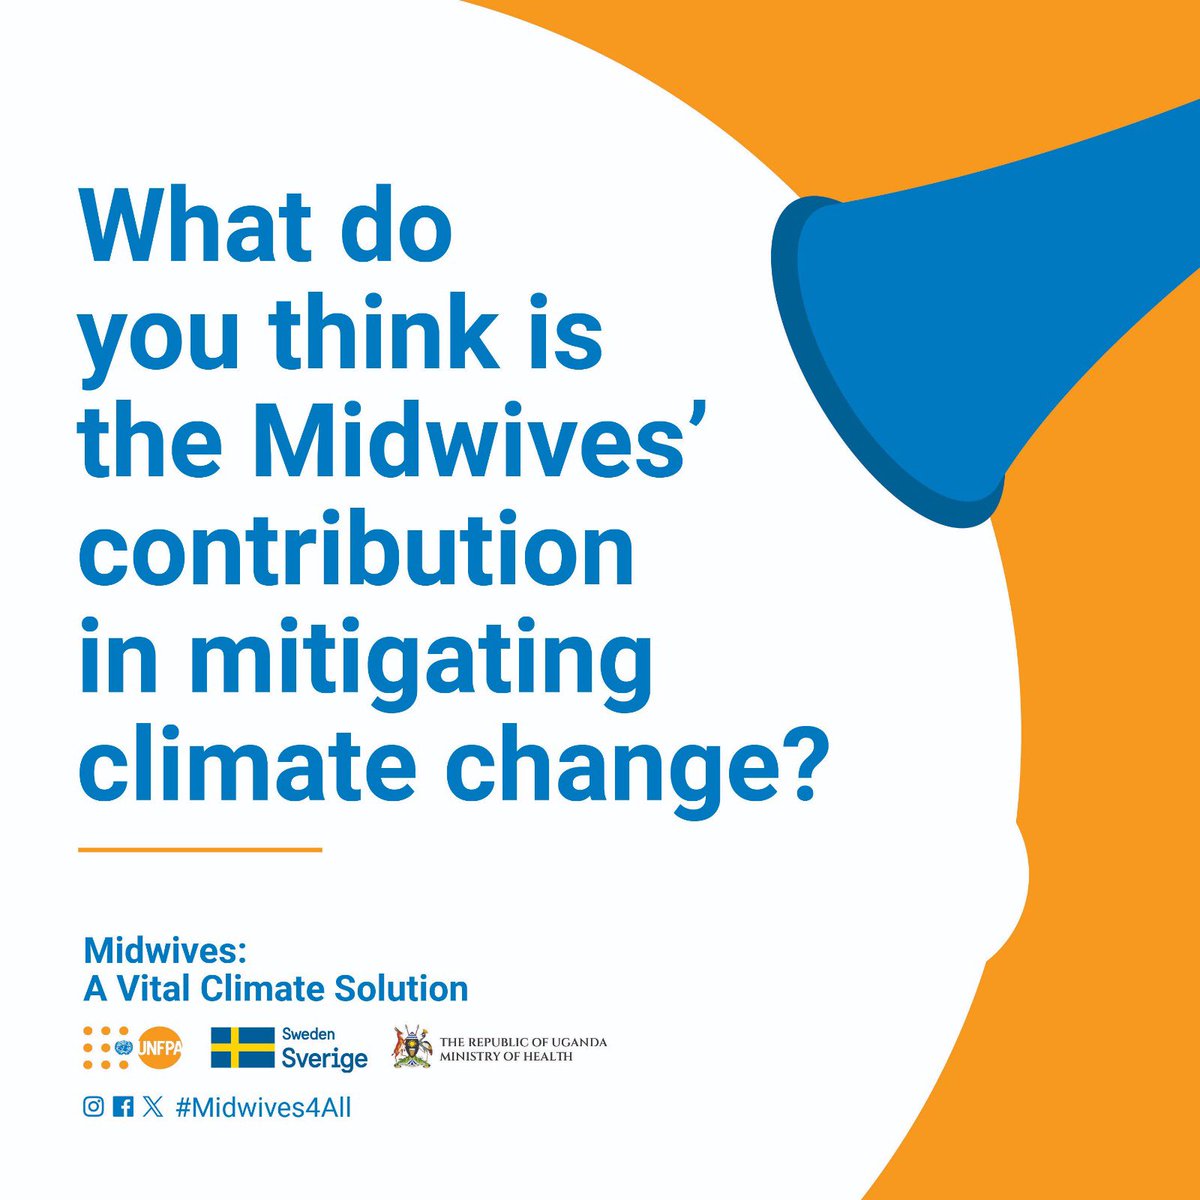 May 5th marks International Day of the Midwife! 🌍 
Join @unfpa and the global community in honoring the vital role midwives play on the frontlines of the climate crisis.
 #Midwives4All 
#IDM